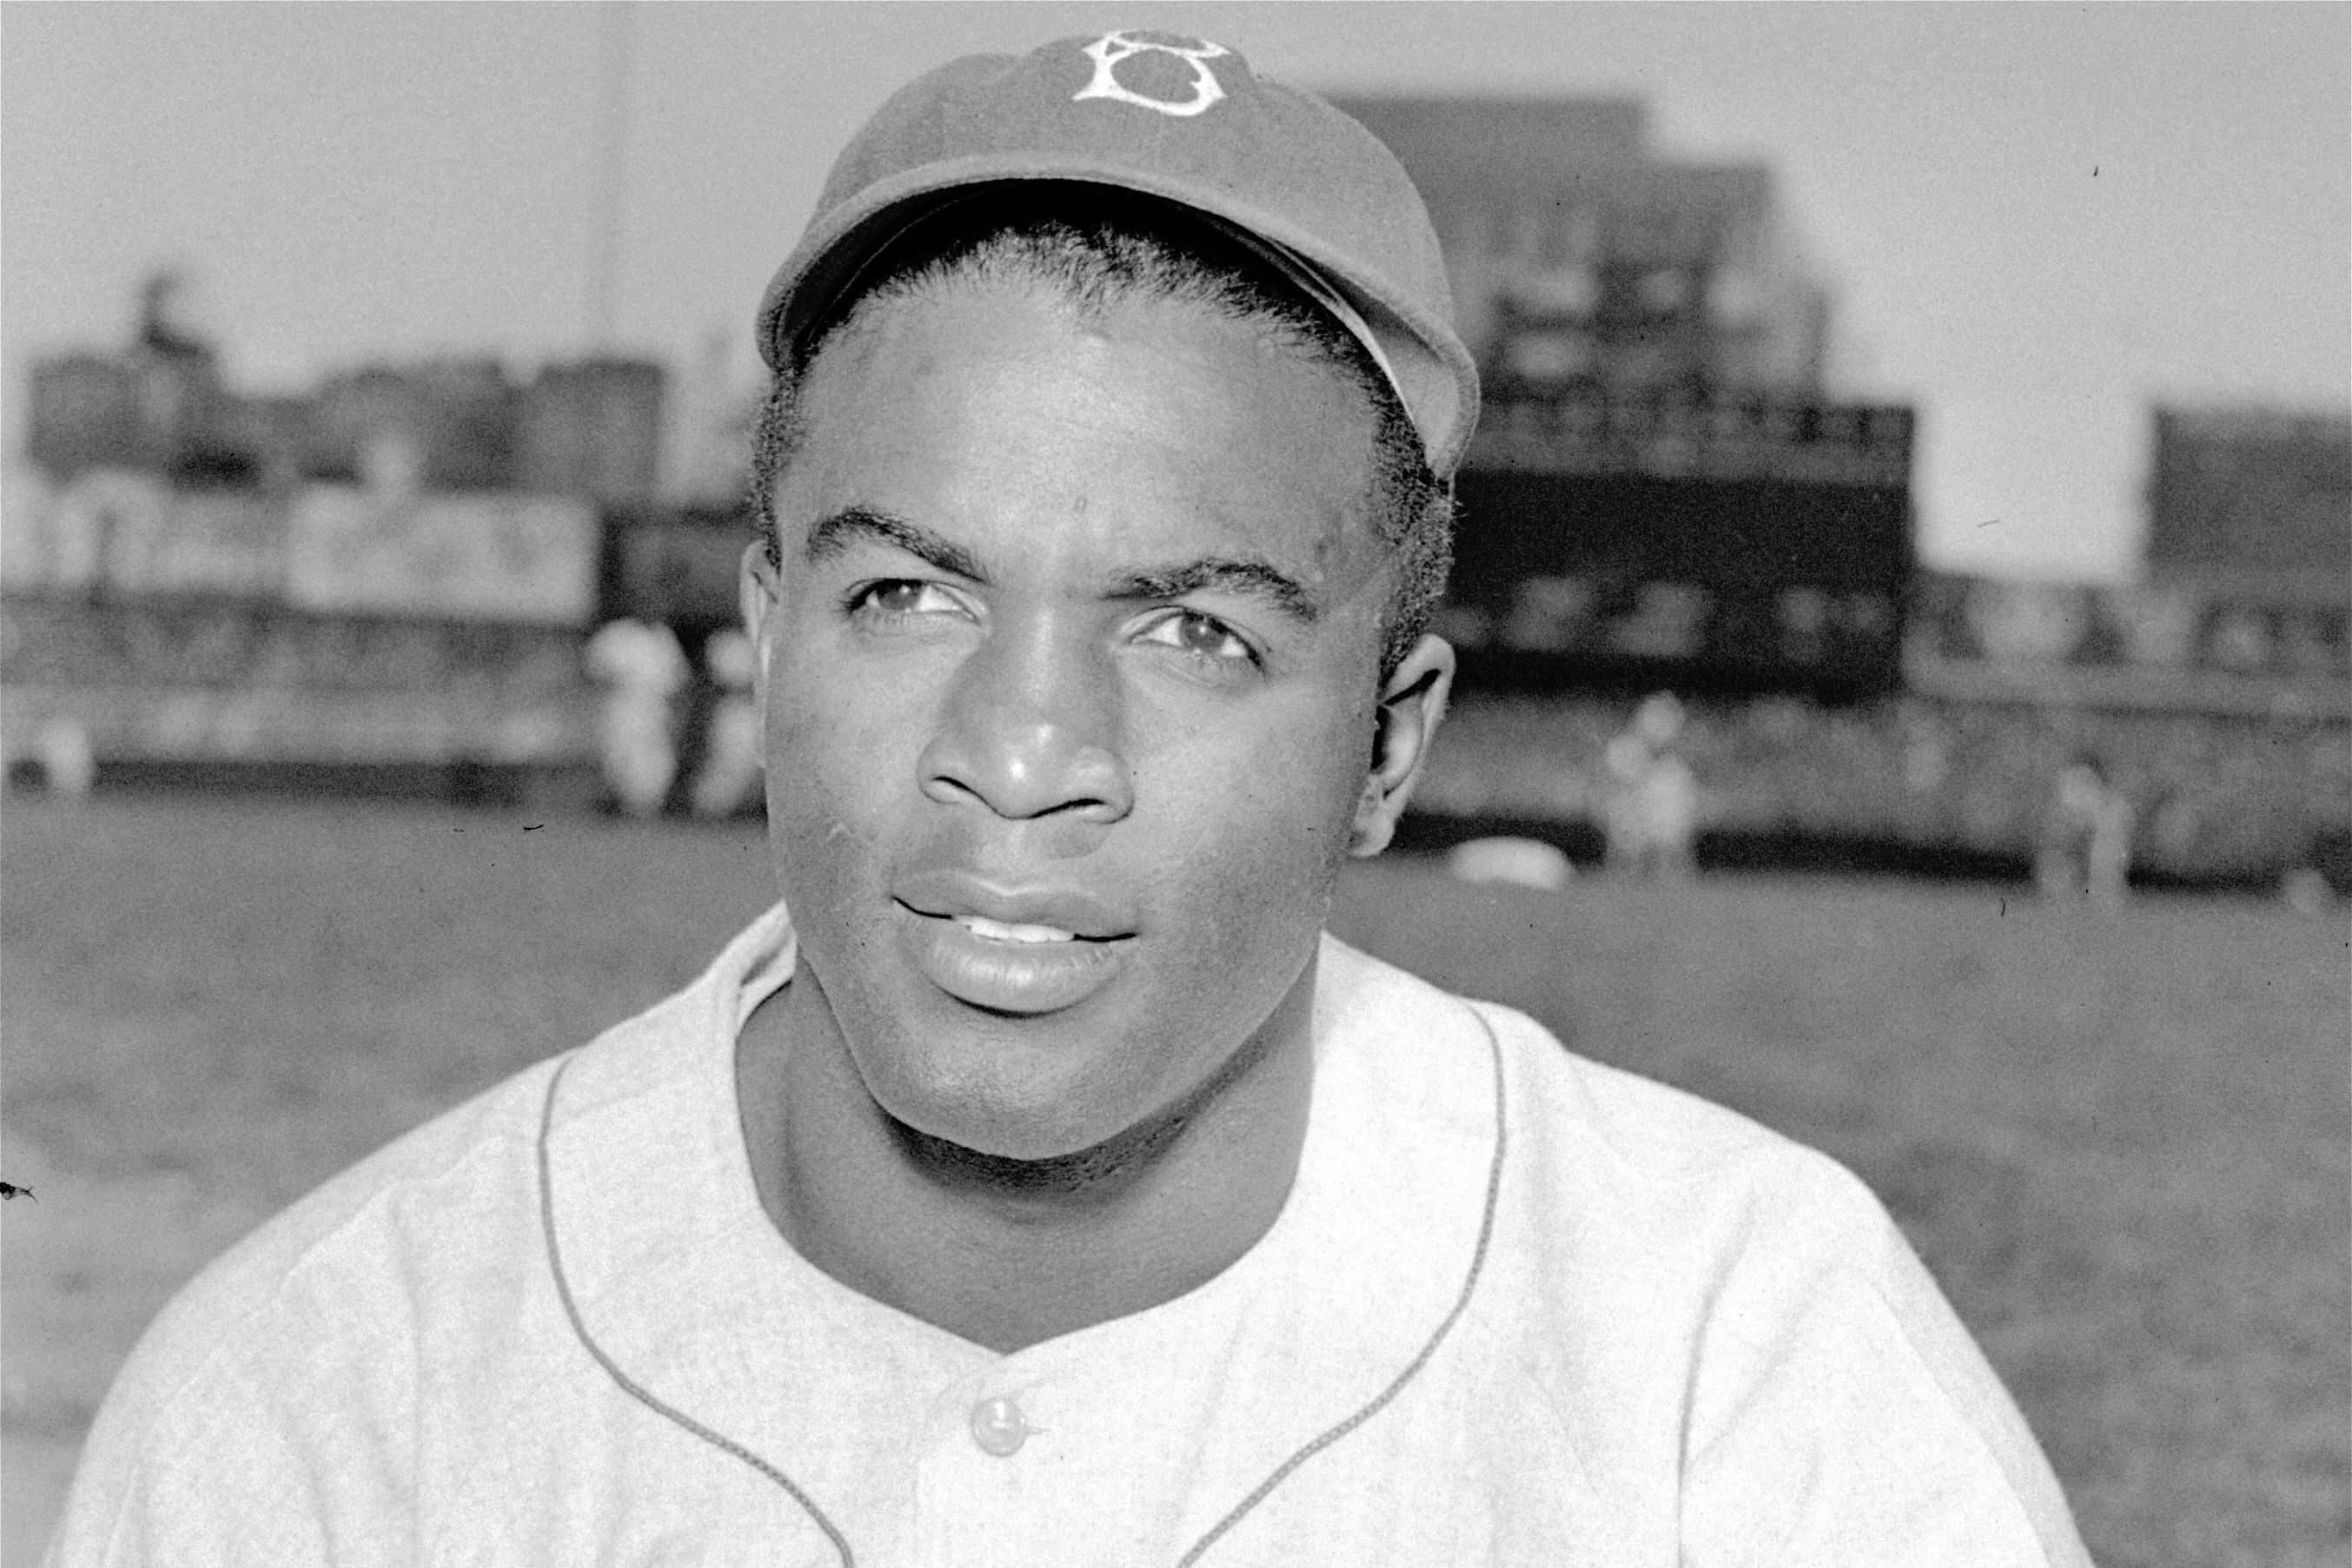 Jackie Robinson's 42 in Dodger blue for all uniforms on April 15 -  Washington Times